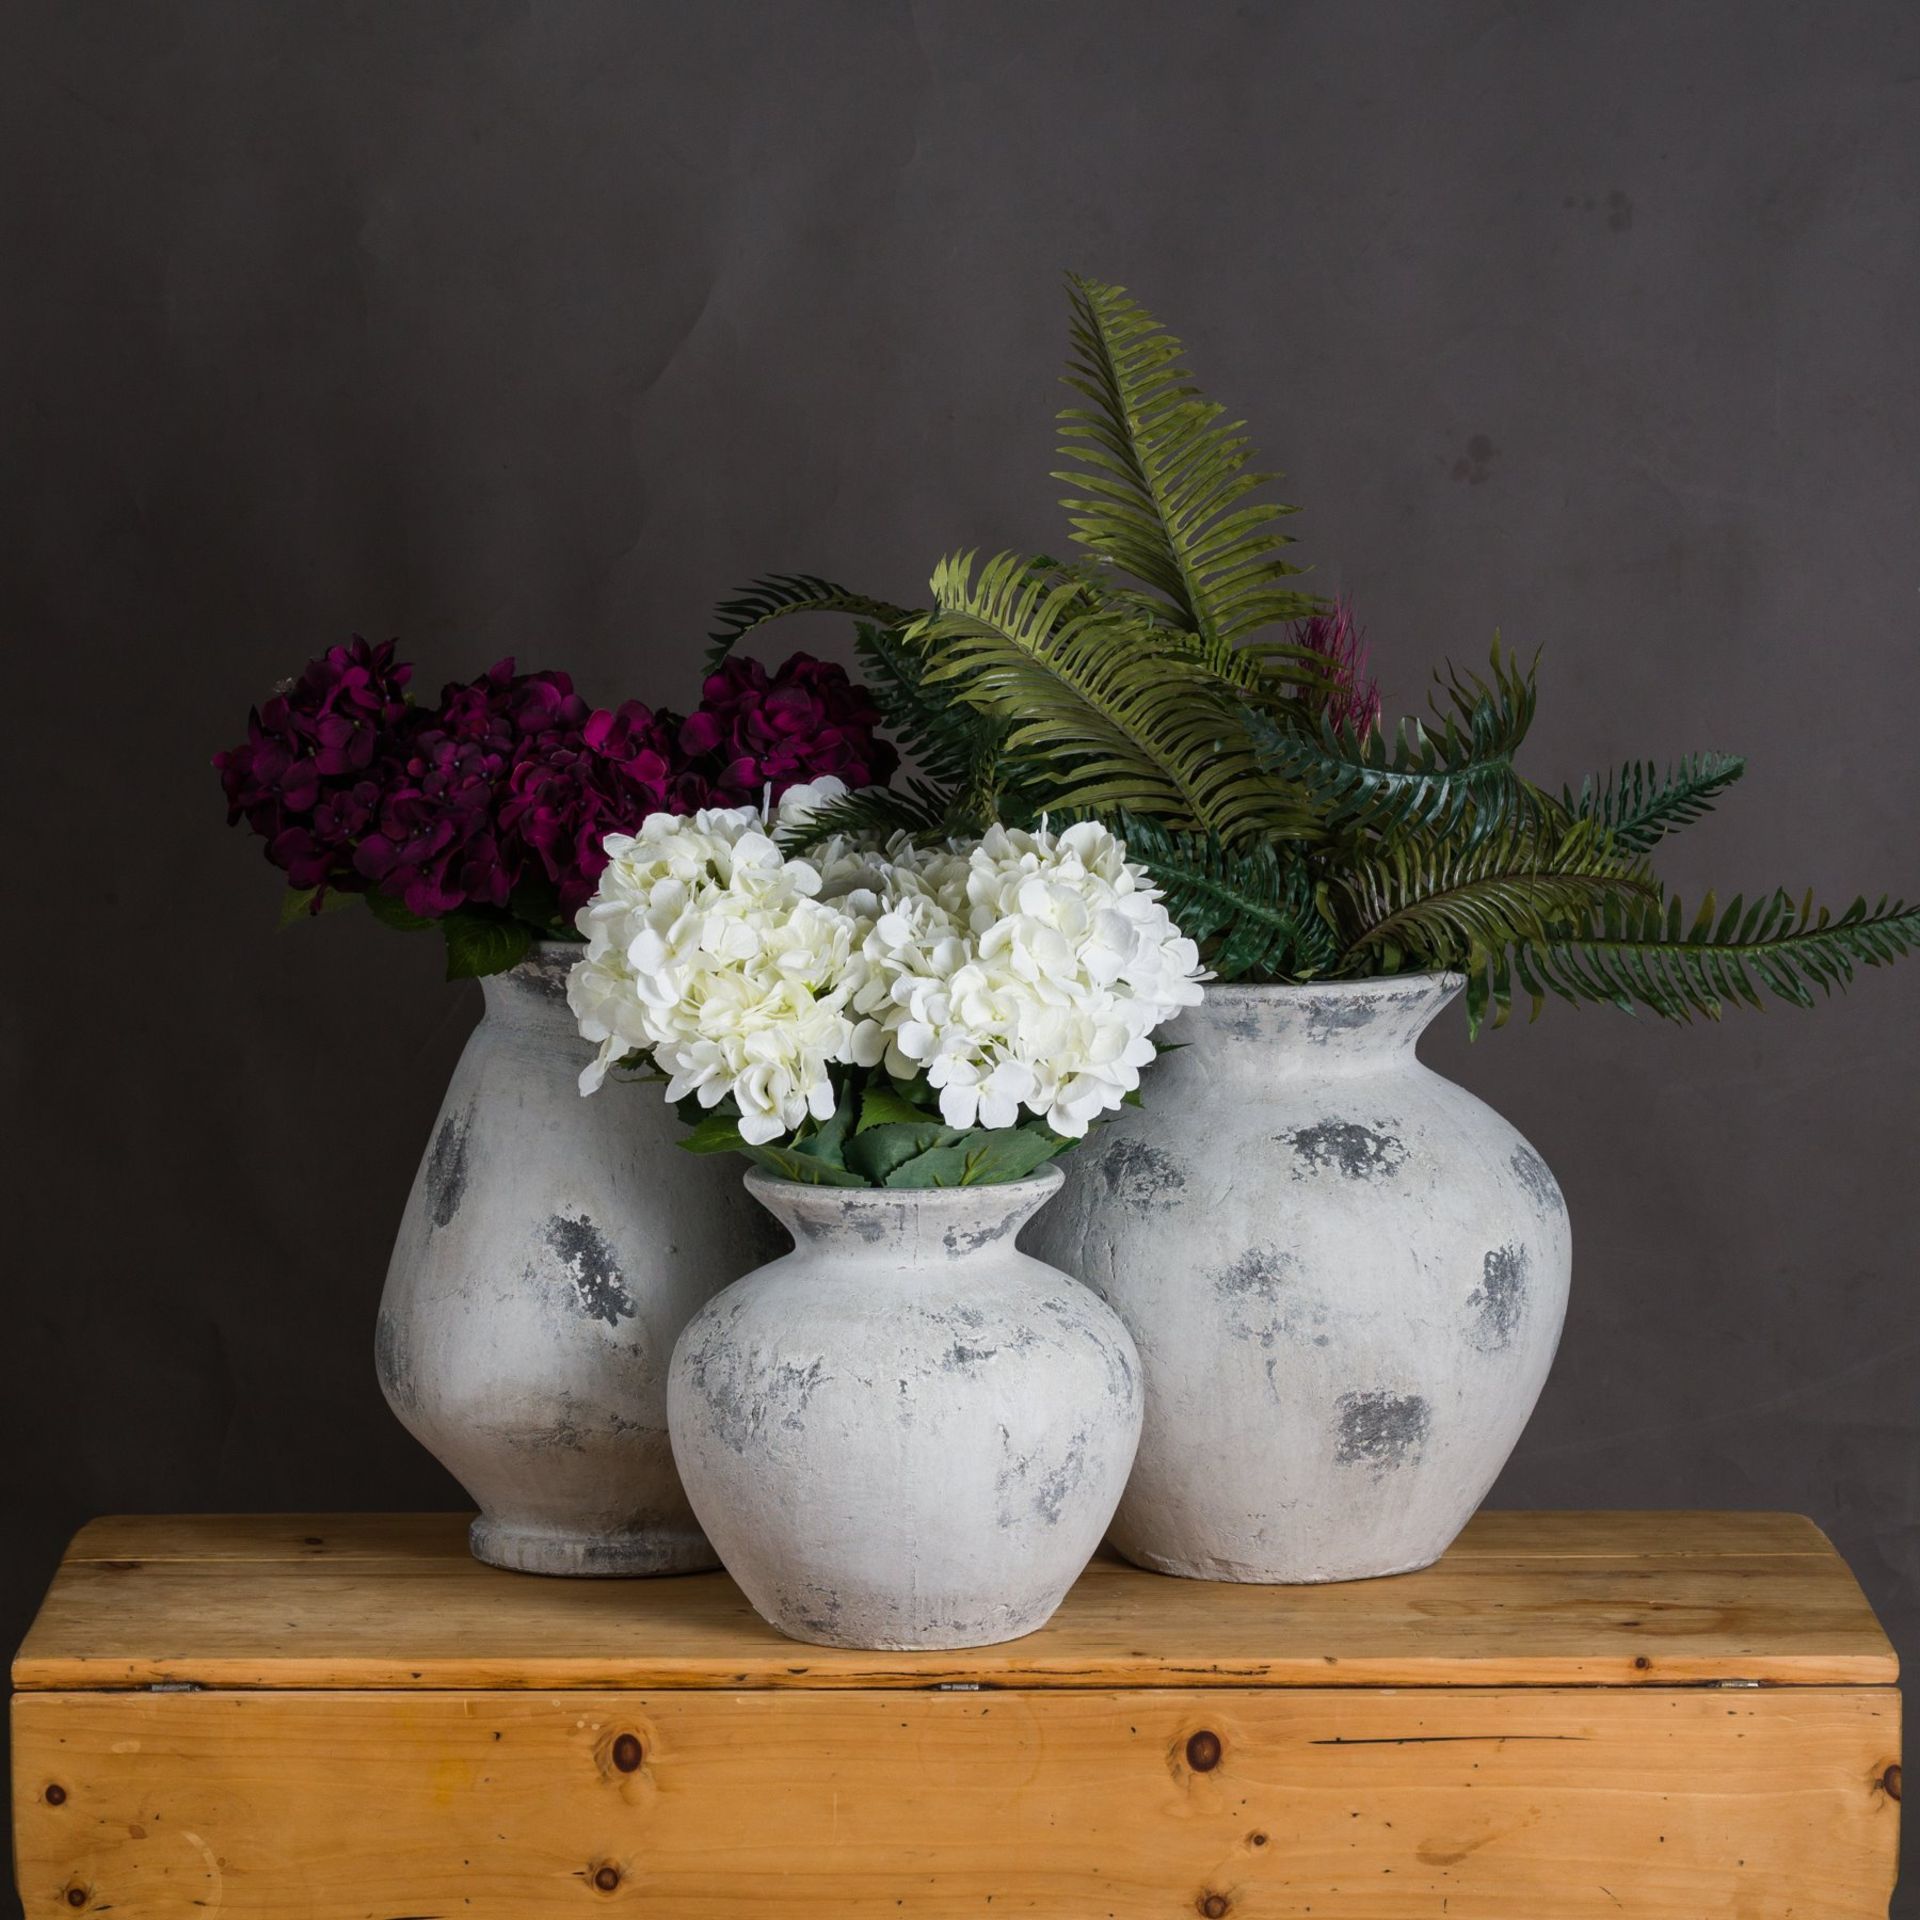 Blanka Large Antique White Vase Display A Beautiful Bouquet Of Flowers Or Greenery To Complete